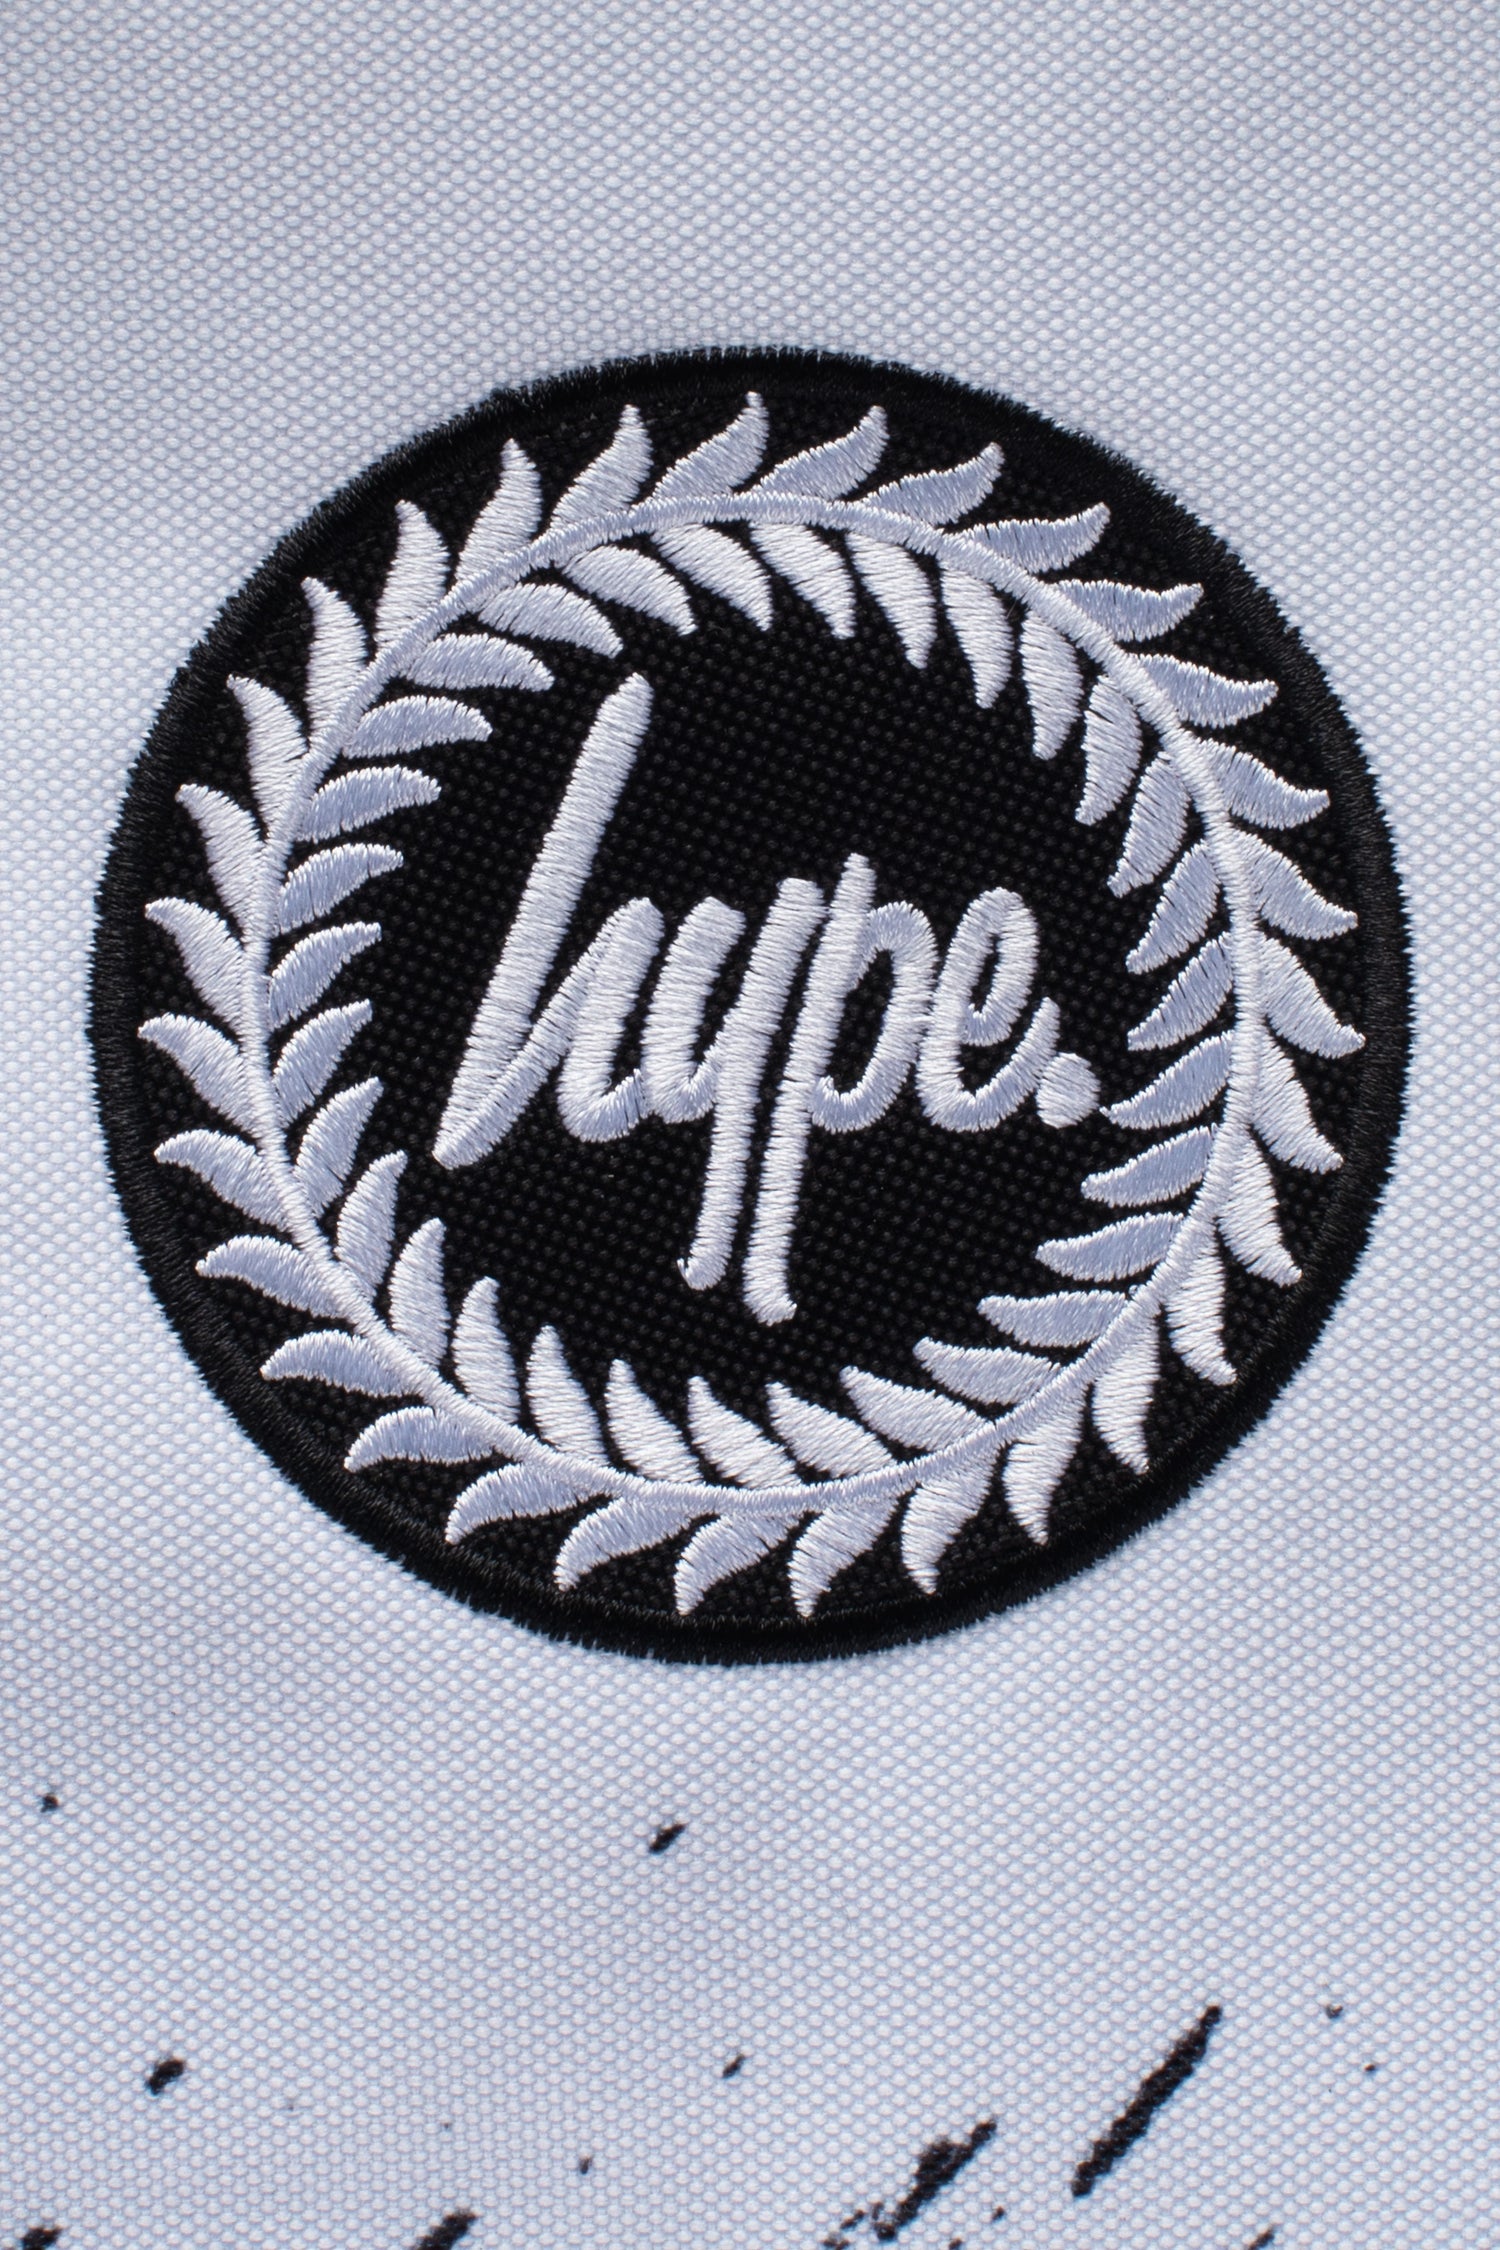 HYPE UNISEX BLACK/WHITE SCRATCH FADE BACKPACK